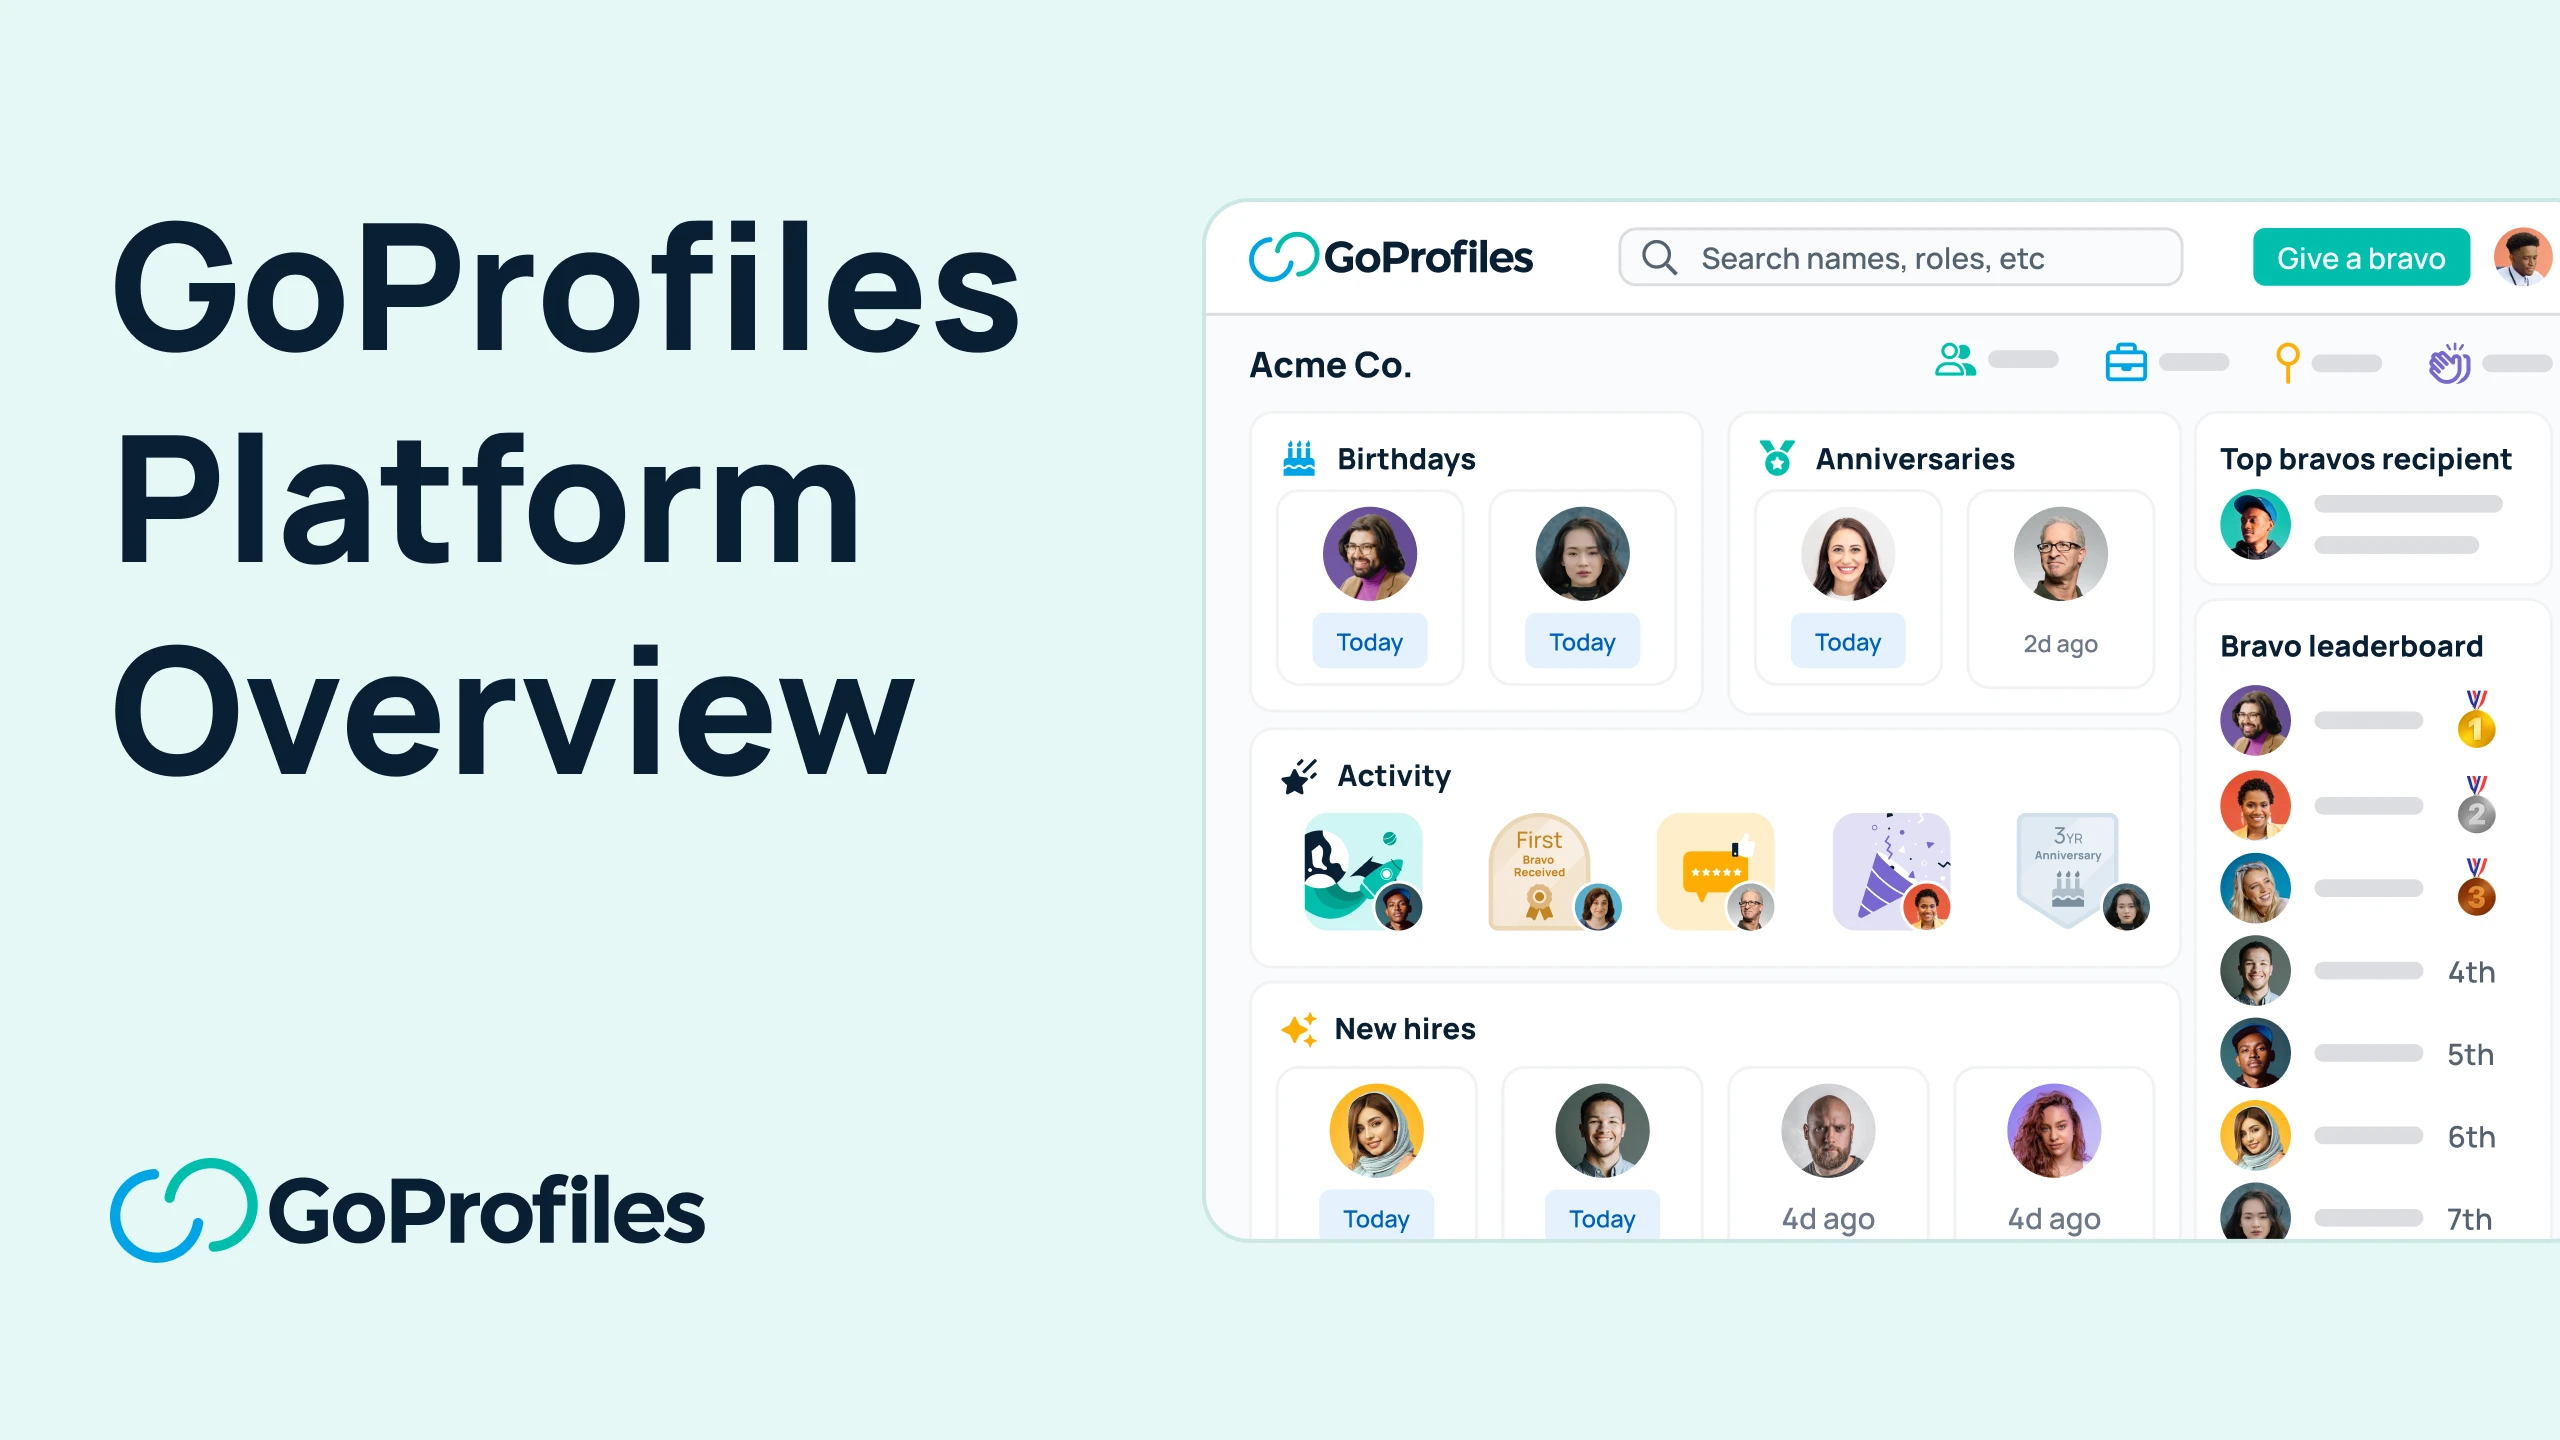 GoProfiles for Employee Engagement and Culture: Leverage GoProfiles to gain stronger relationships across your distributed organization.